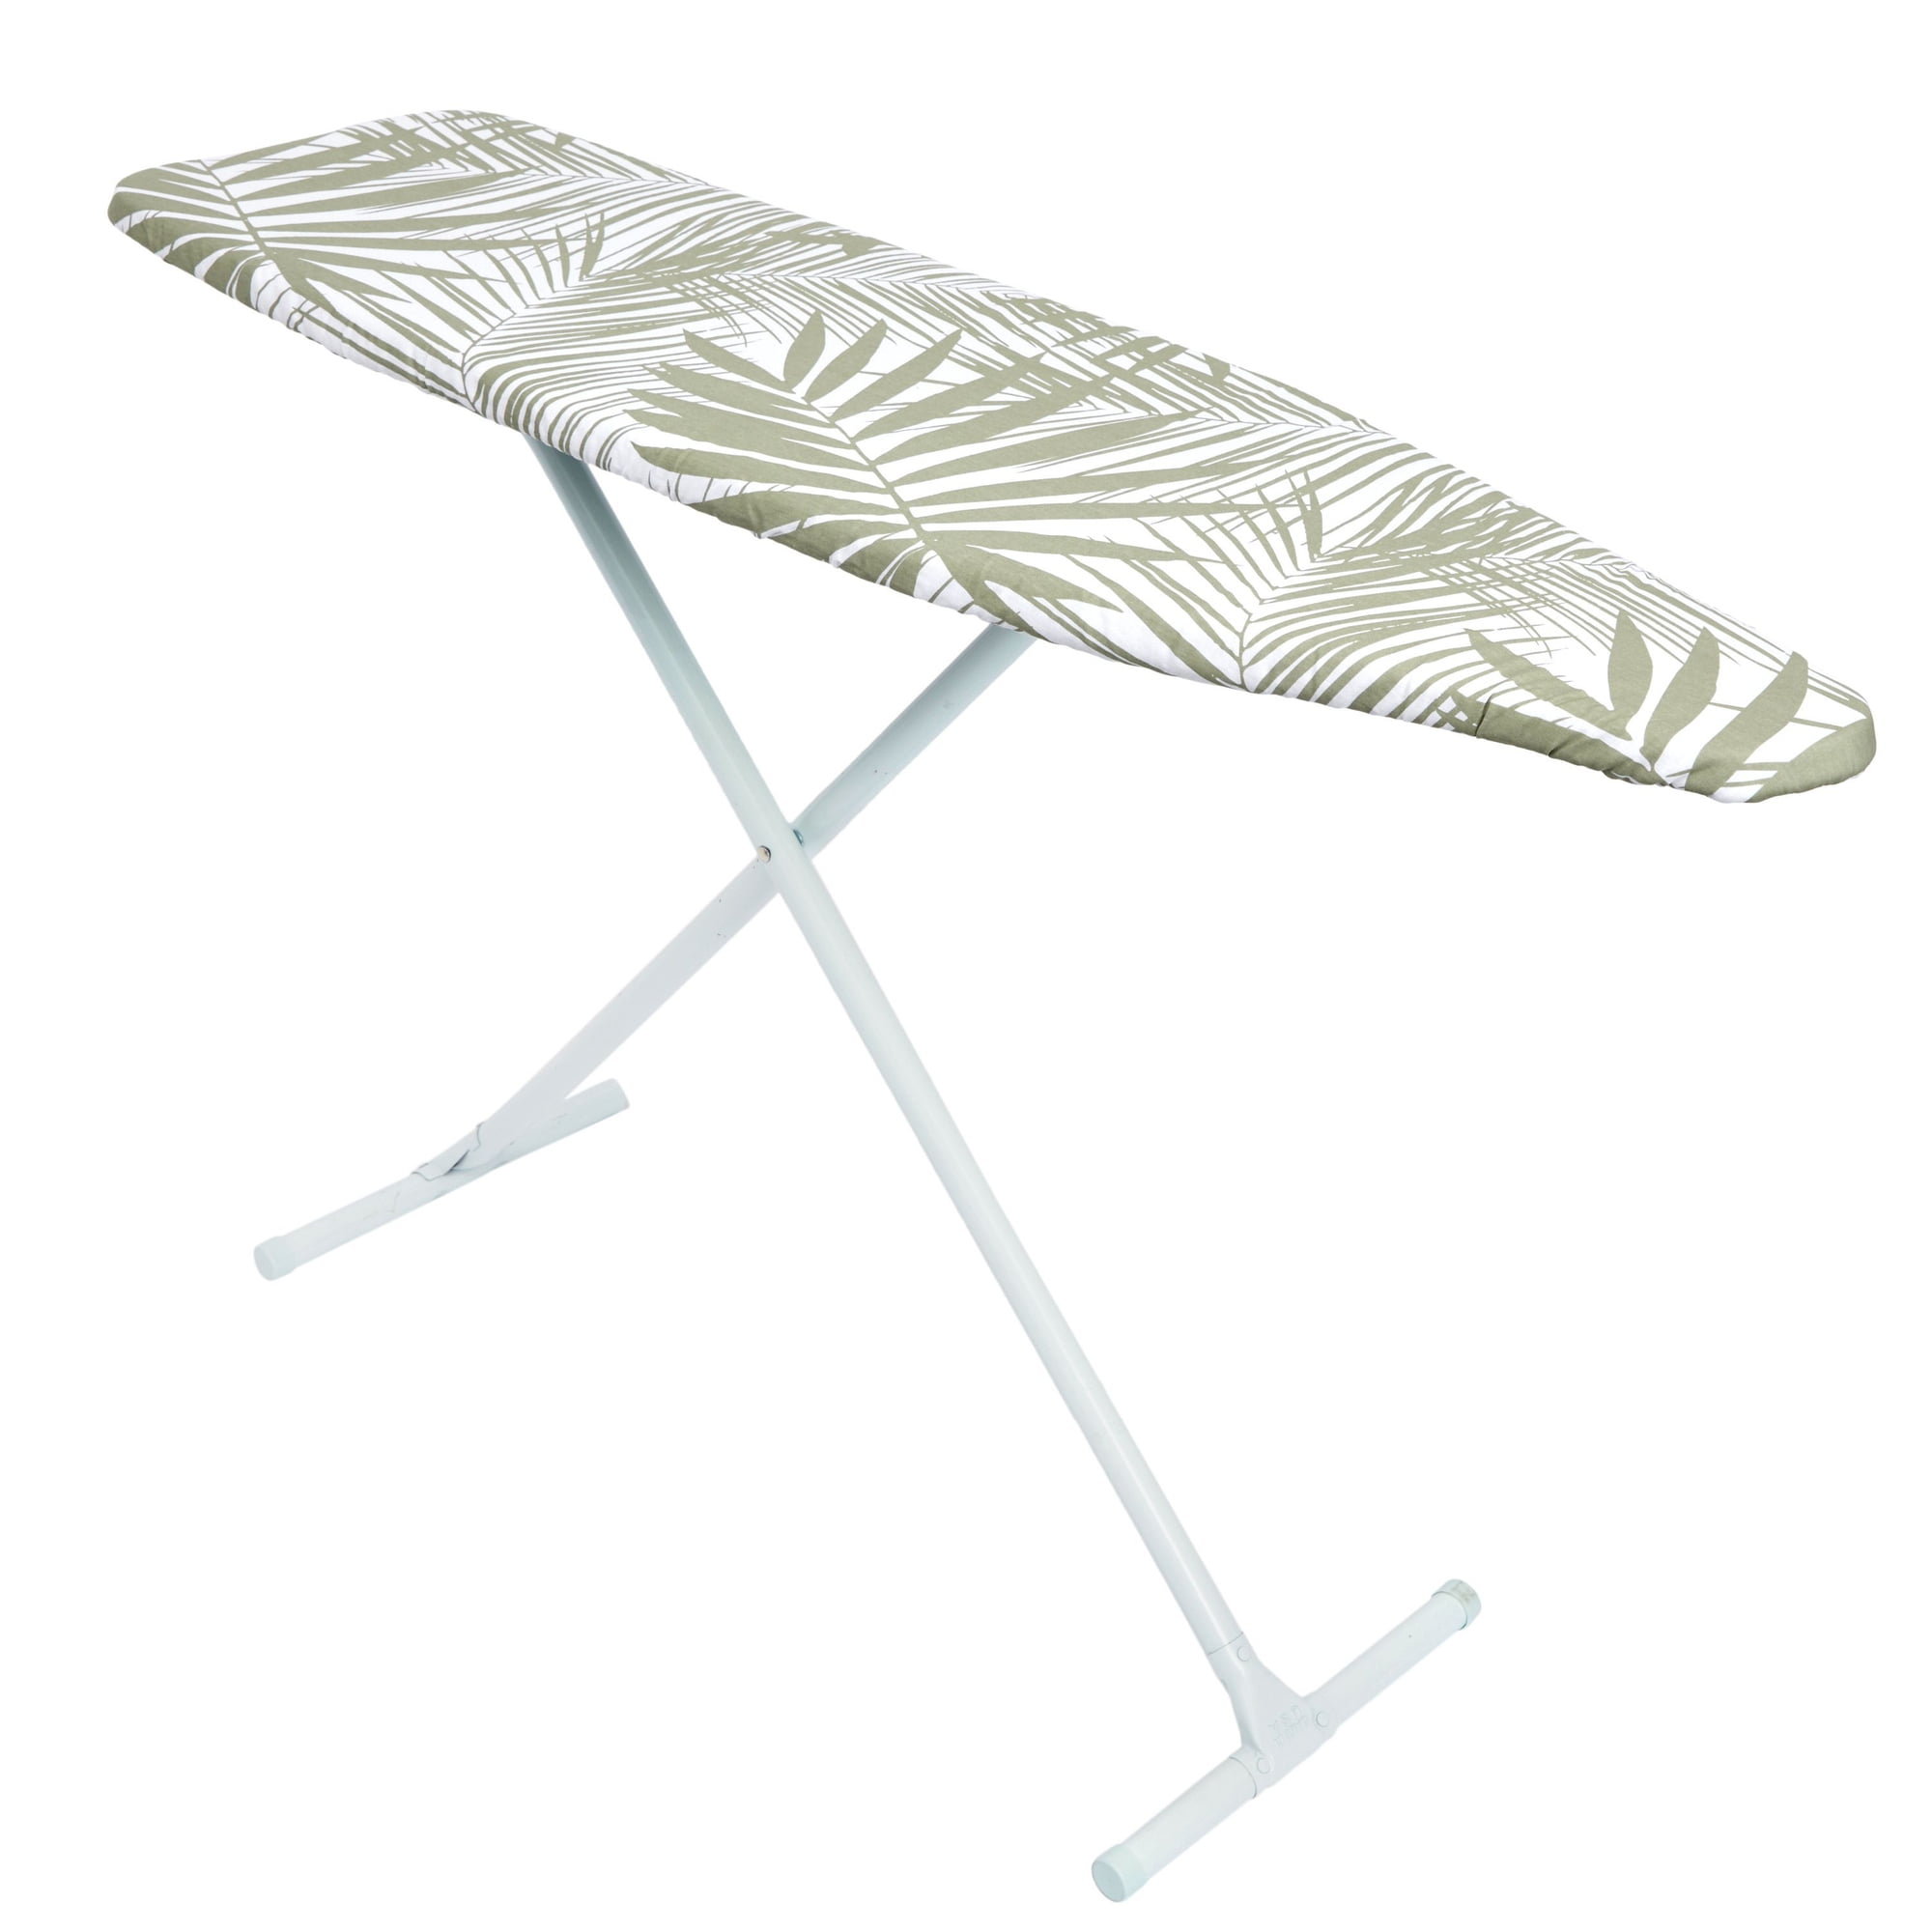 Travel-quilters pad 14x 27 Ironing Board Cover – Miracle Ironing